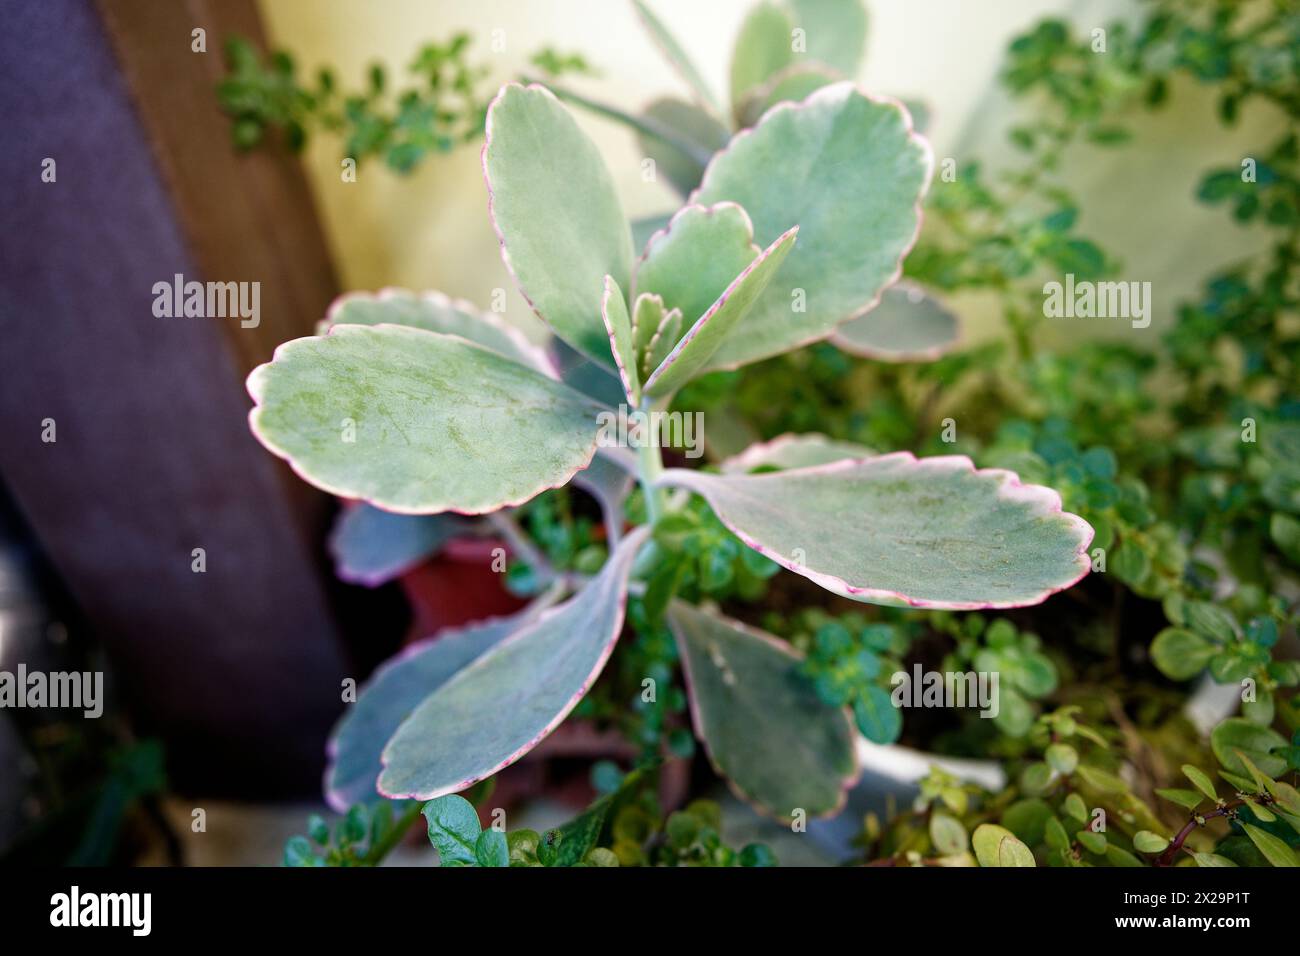 light blue and turquoise leaves of the Kalanchoe fedtschenkoi plant Stock Photo